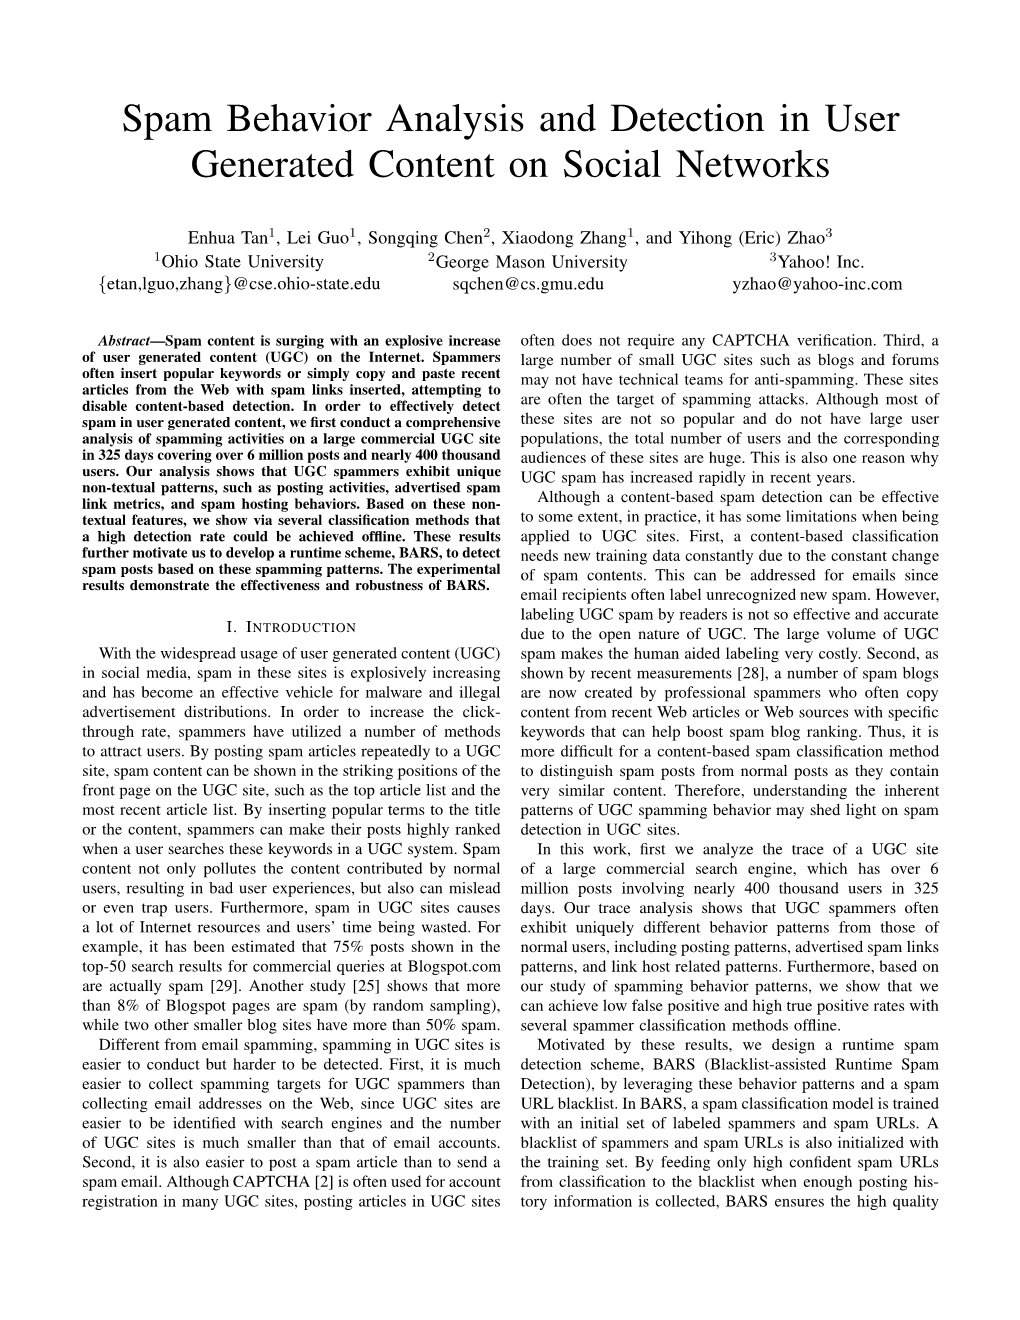 Spam Behavior Analysis and Detection in User Generated Content on Social Networks